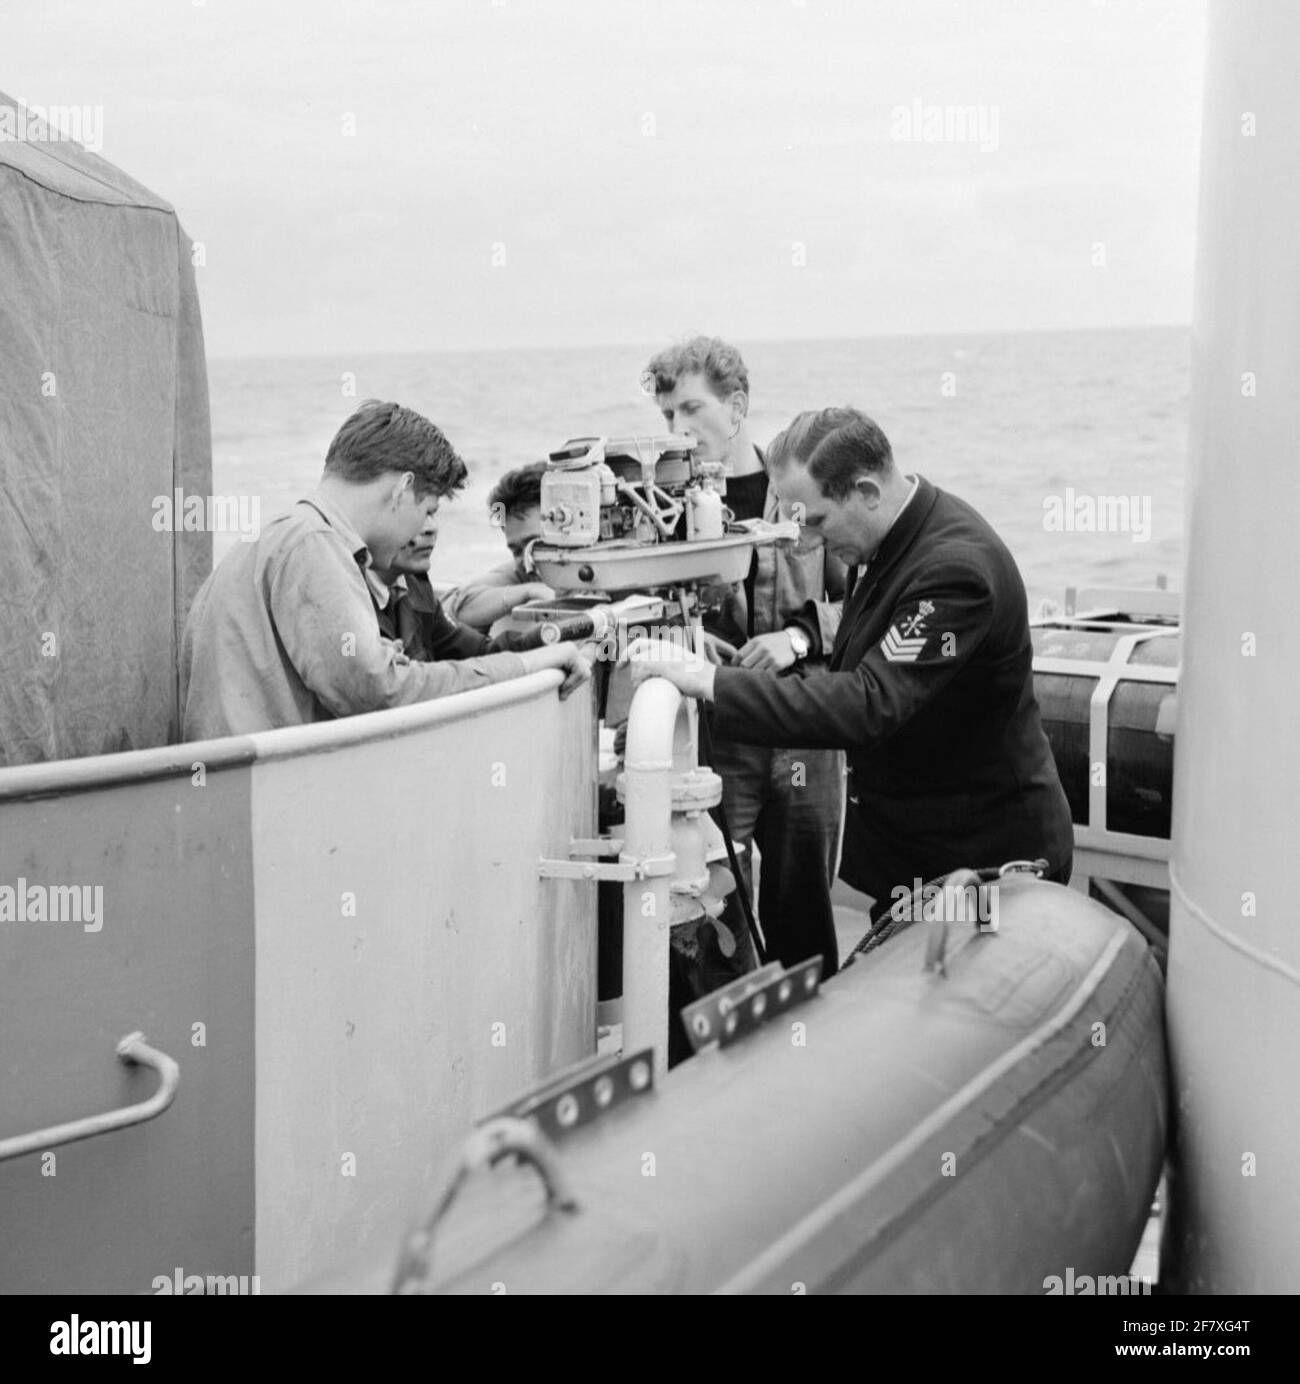 Fishing inspection in the North Sea with the frigate of predator class Hr.Ms. Wolf (F 817) (1954-1984) (EX-USS PCE 1607). On board the wolf, the outboard engine of the dinghy / rubber boat is checked by, among other things, a Sergeant-Machinist (SGTMACH). Stock Photo